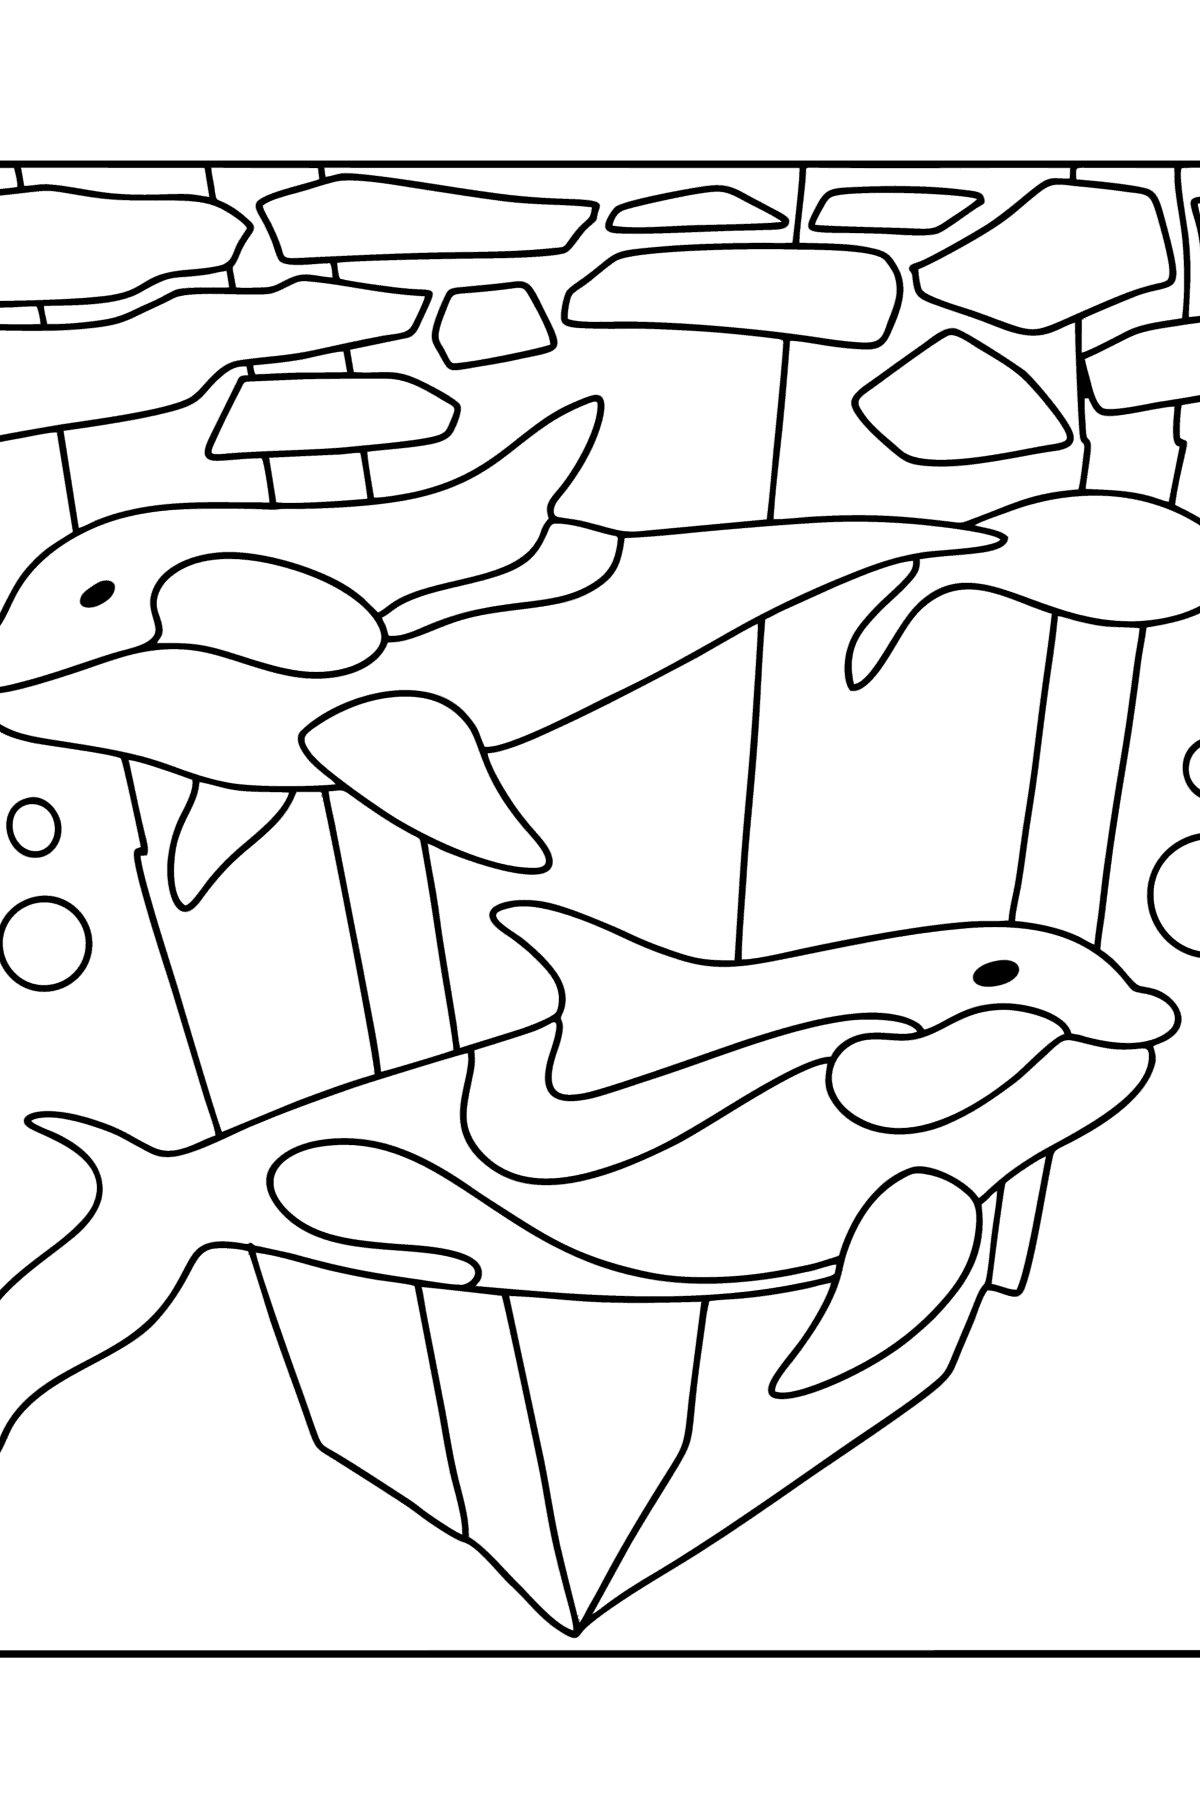 Killer whales coloring page - Coloring Pages for Kids